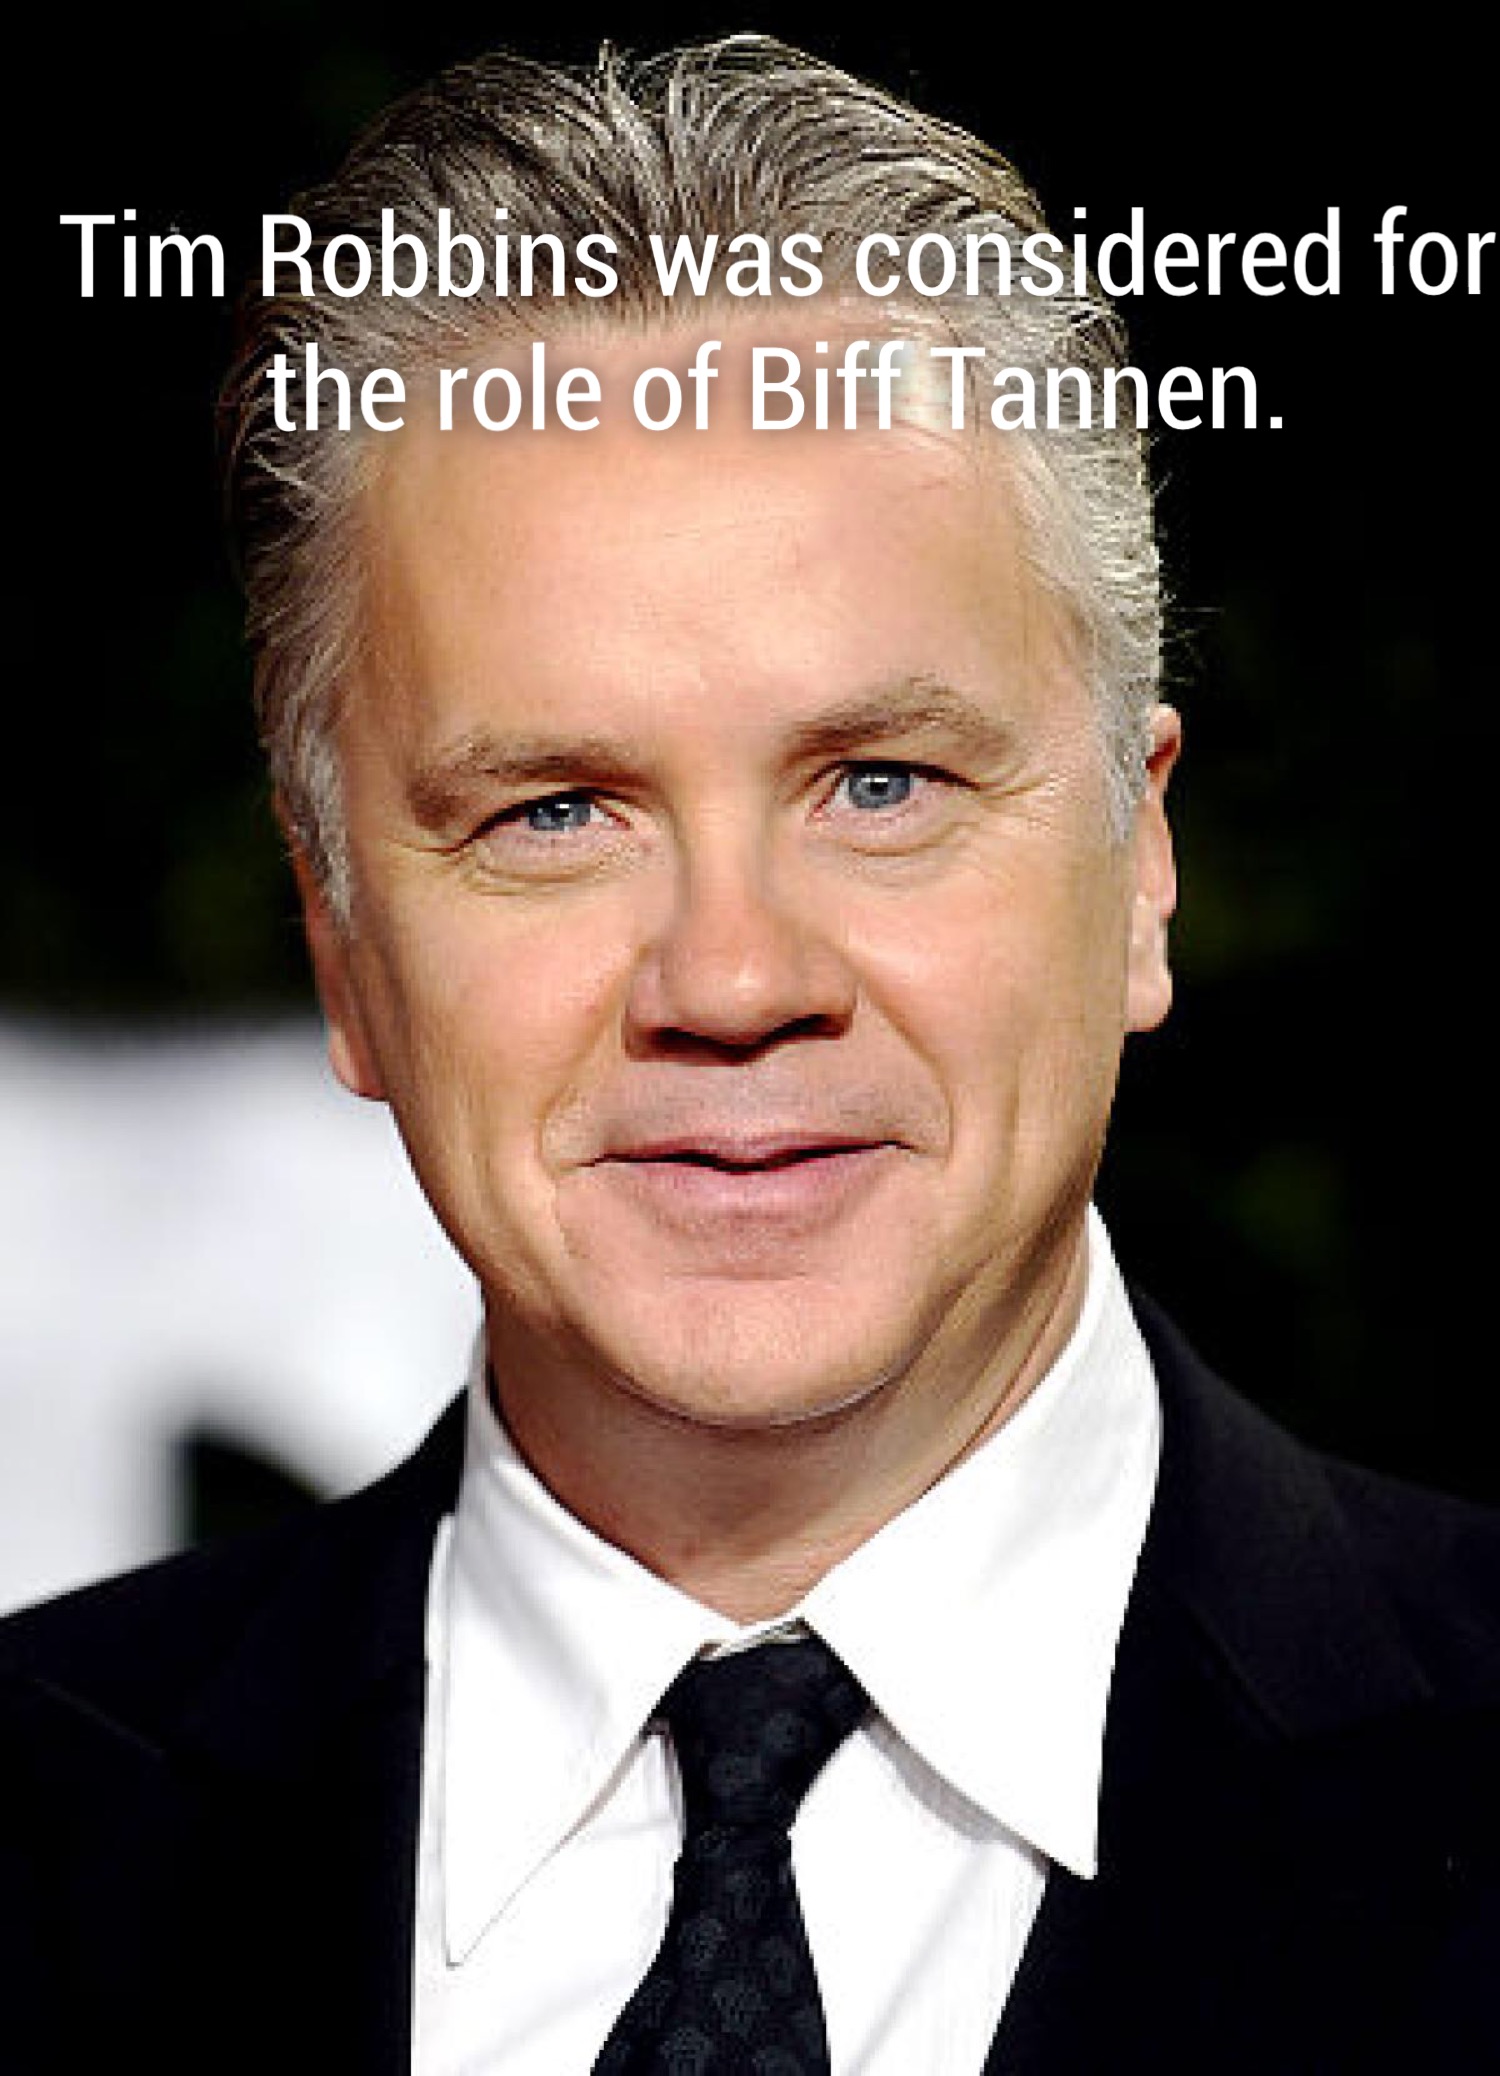 tim robens - Tim Robbins was considered for the role of Biff Tannen.